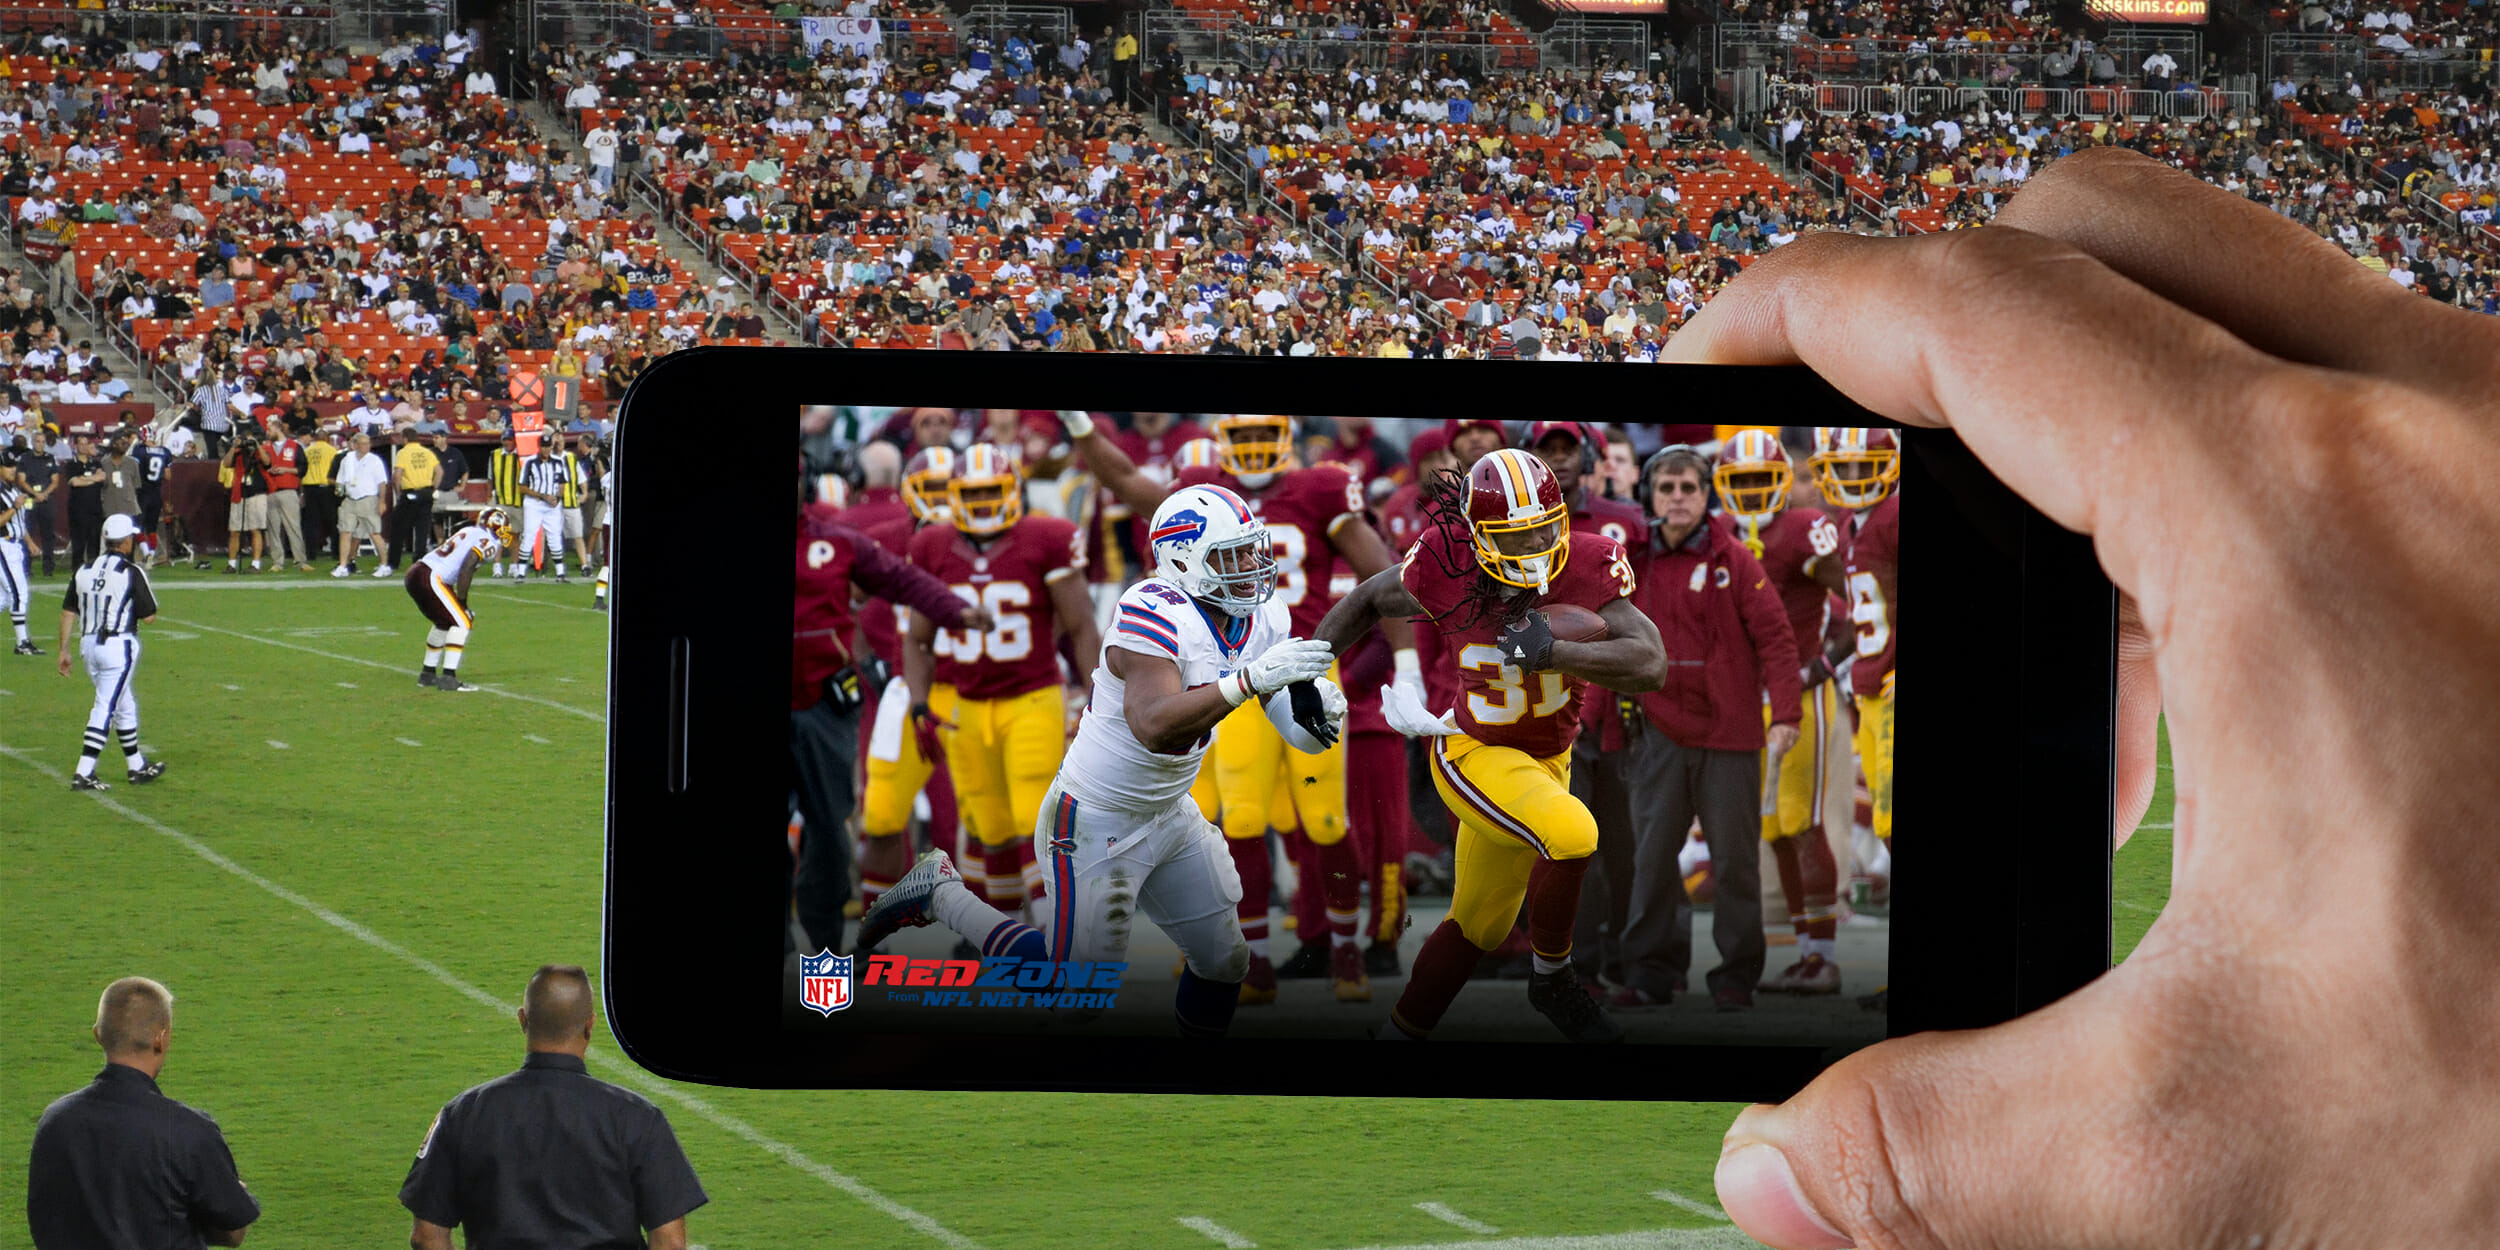 Stream NFL RedZone Live Watch the Best of the Sunday NFL Games